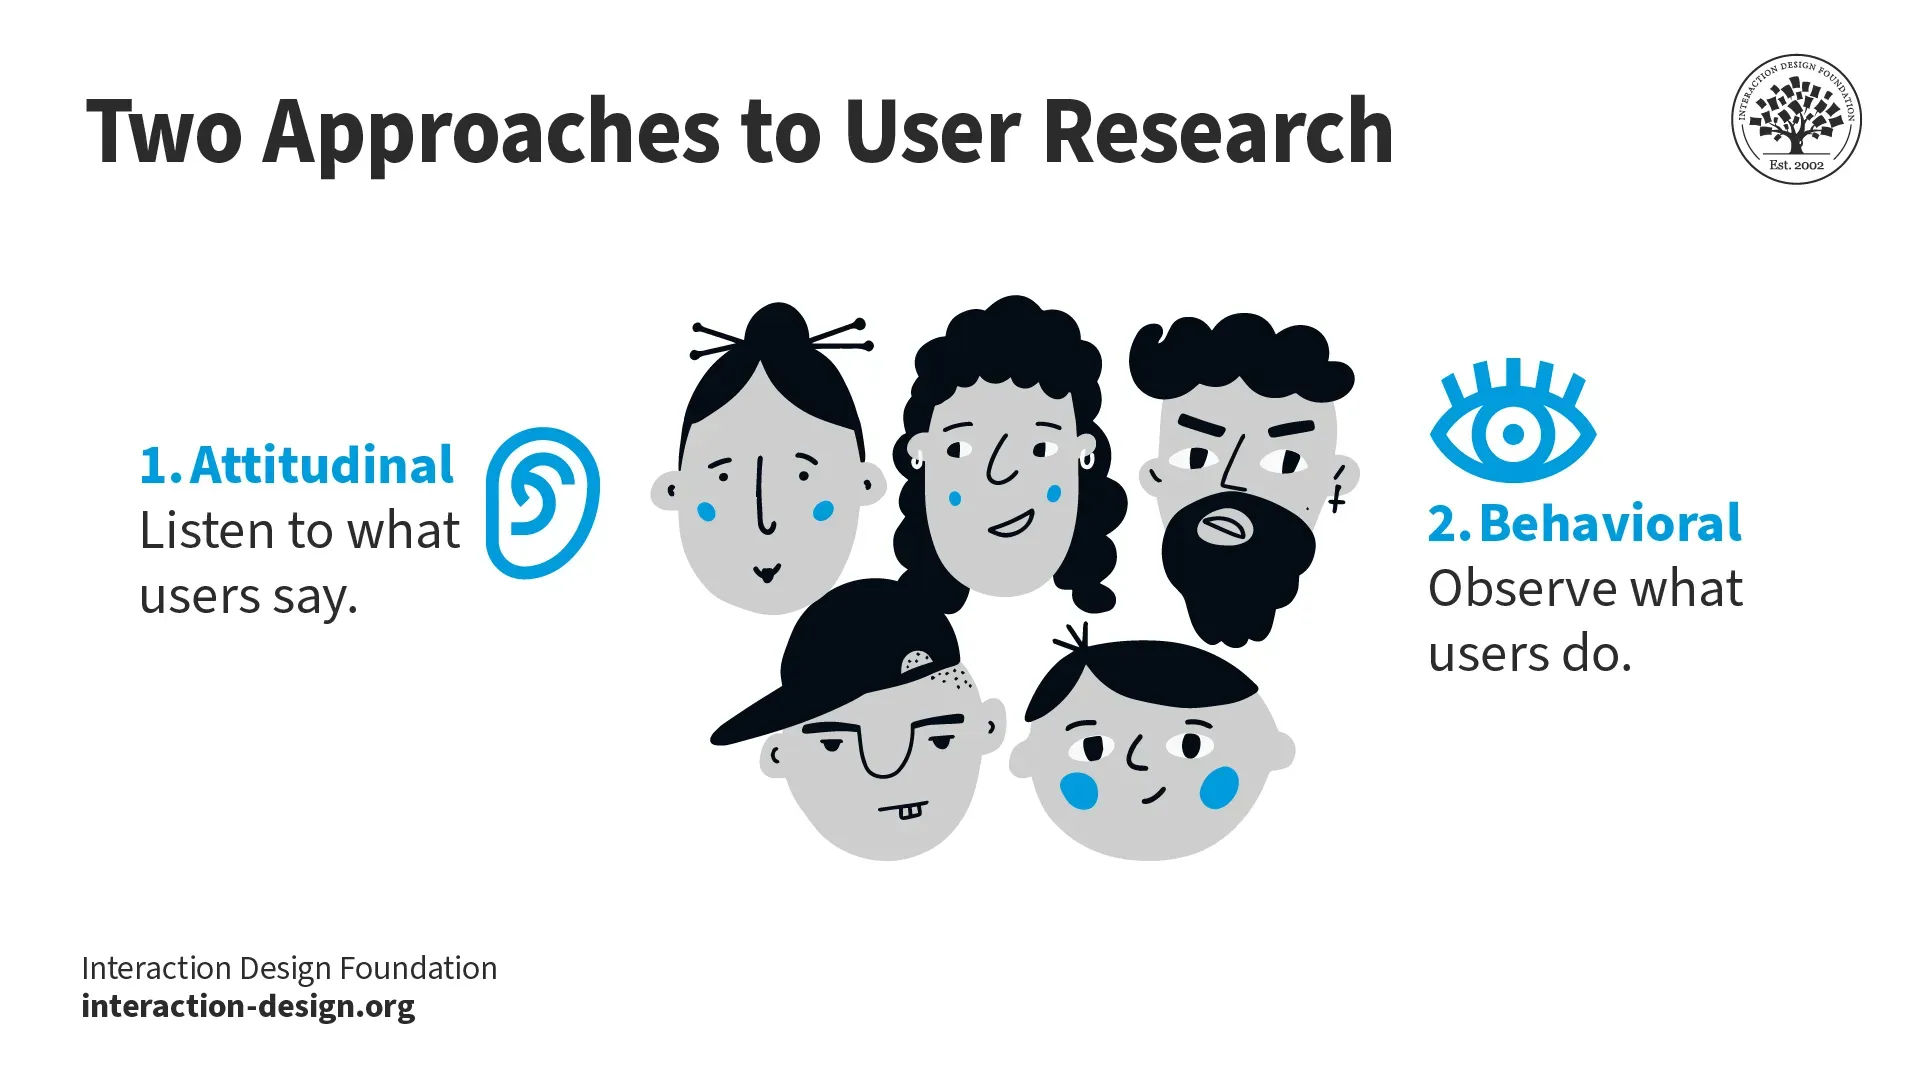 The two approaches to user research